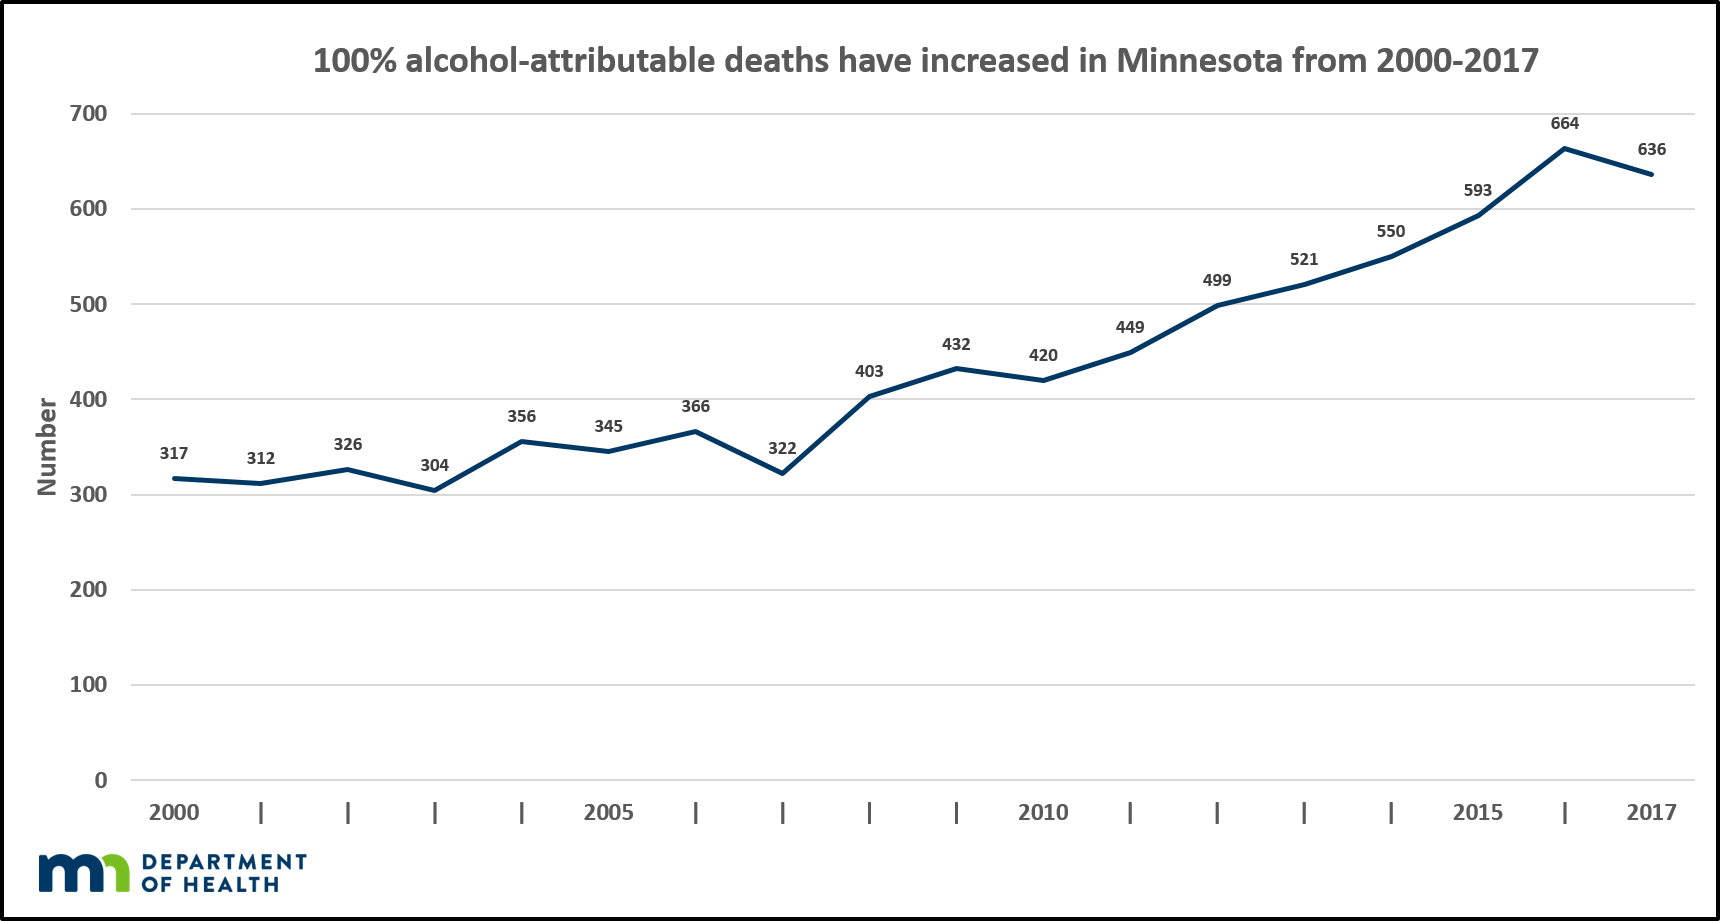 100% alcohol-attributable deaths steadily increased from 2000 to 2017